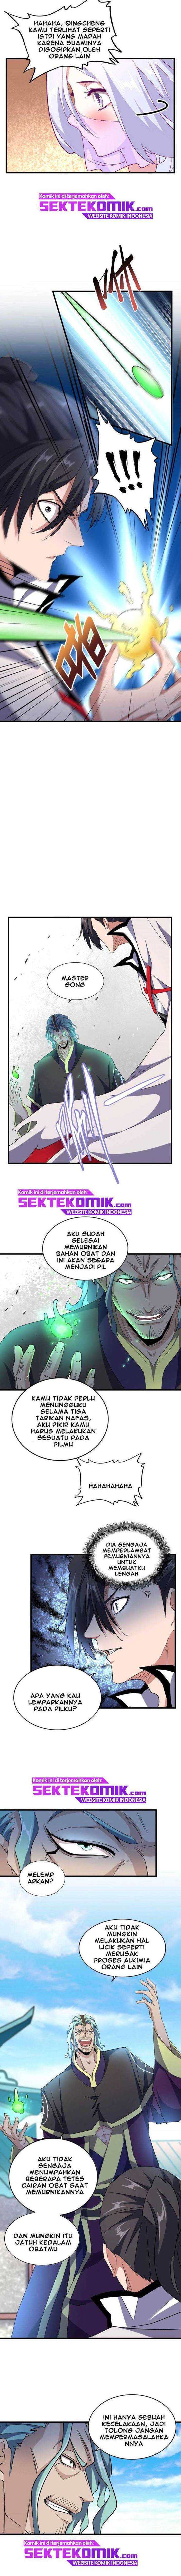 Magic Emperor Chapter 167 Image 3